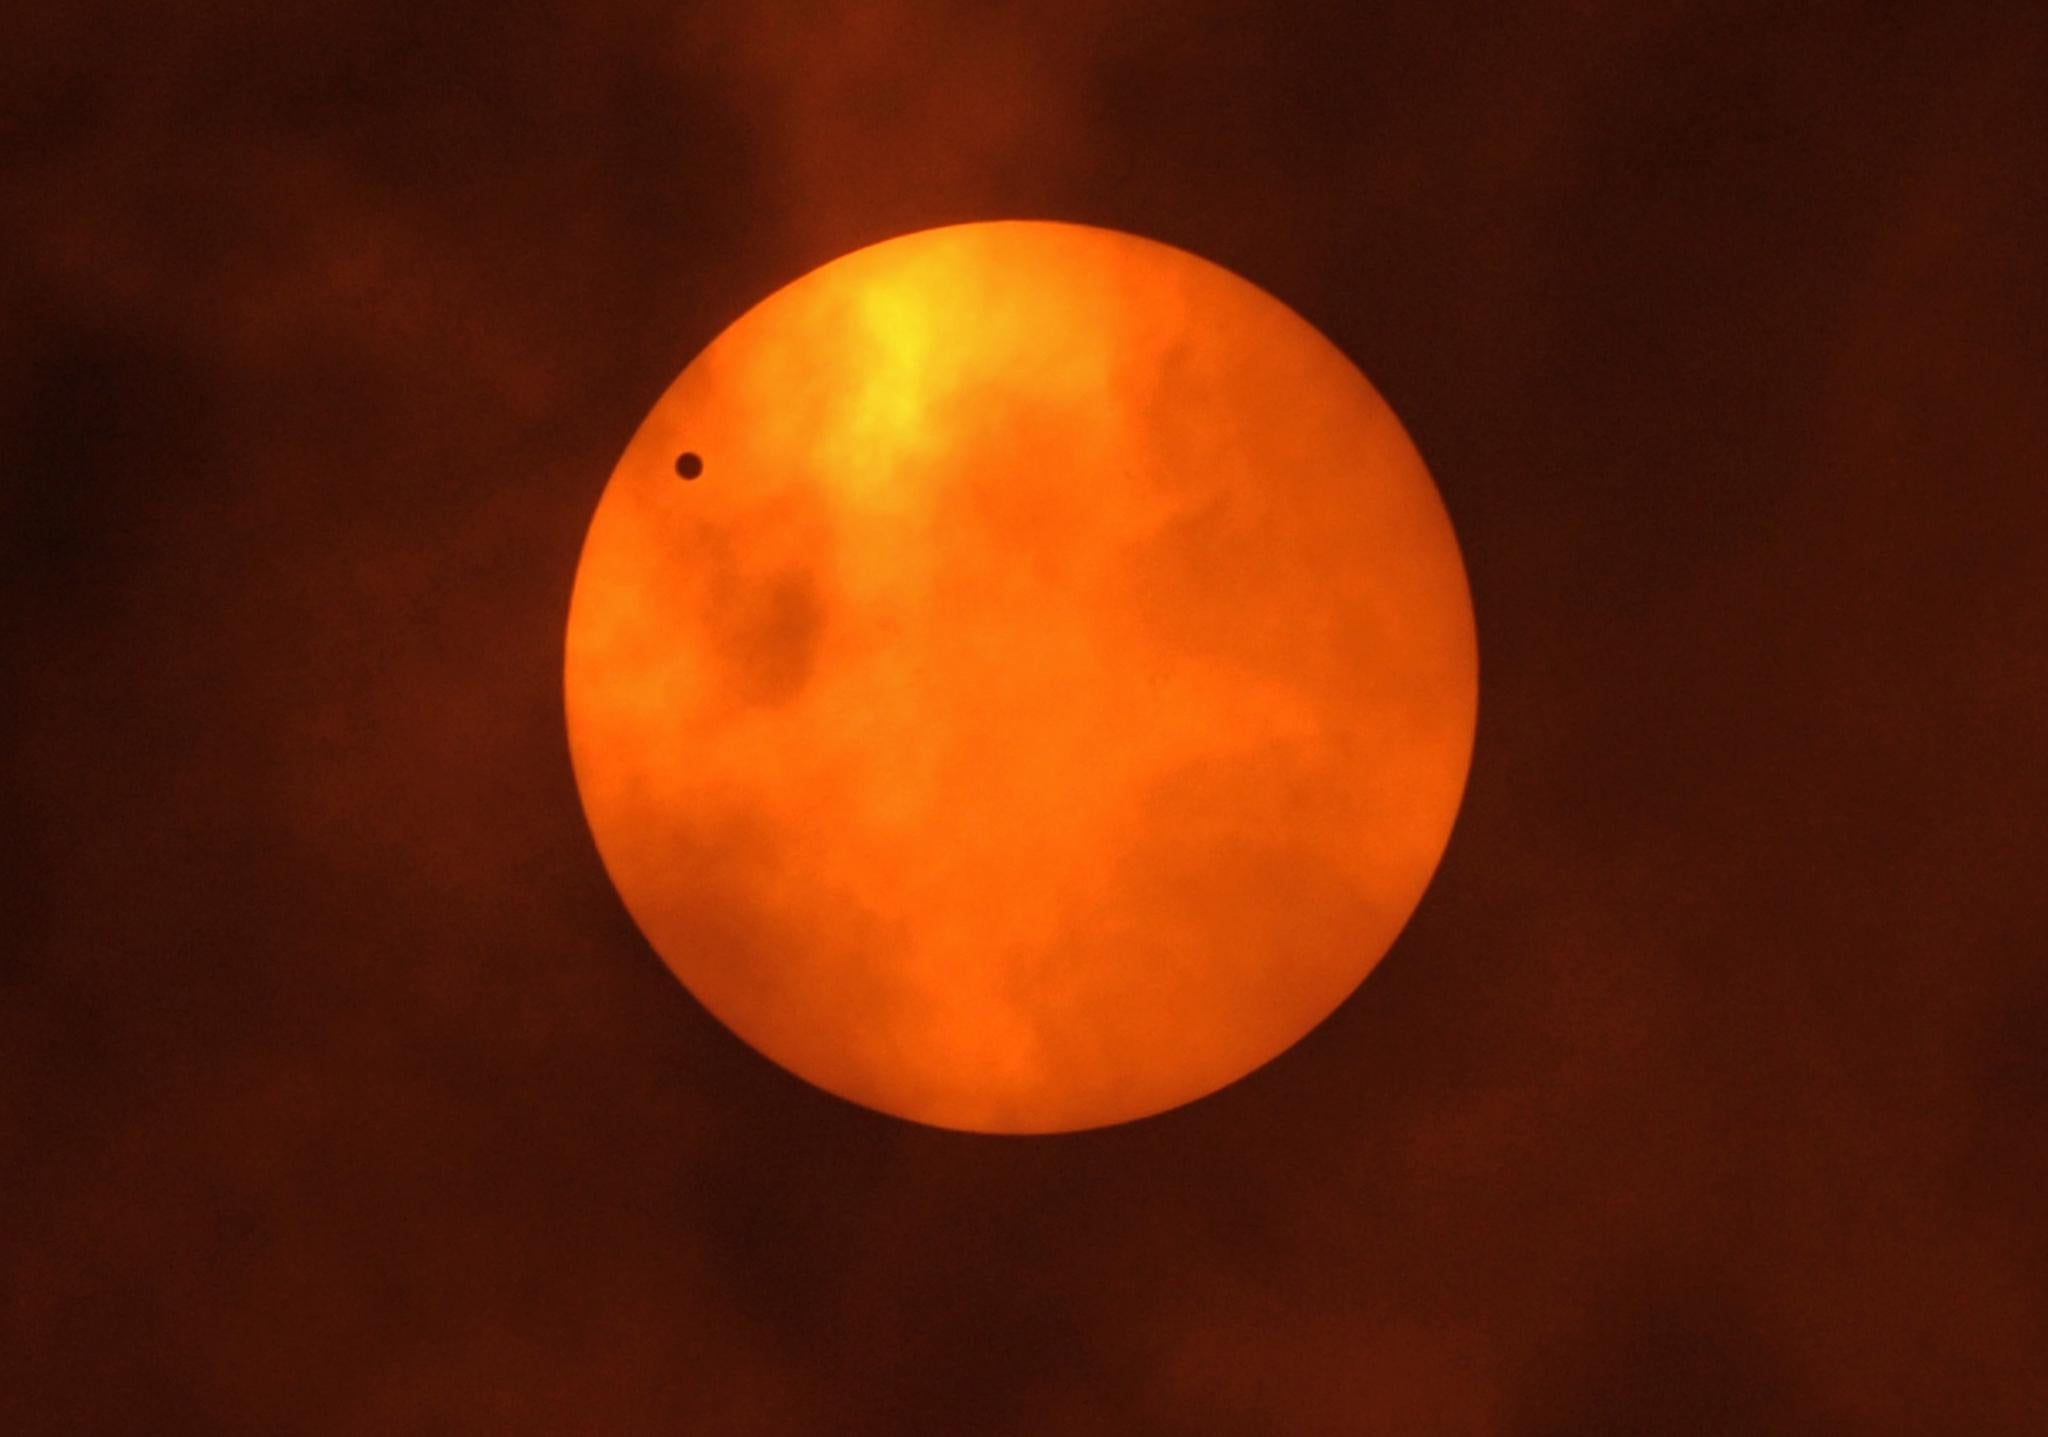 Venus (black dot) is silhouetted as it orbits between the Sun and the Earth during the transit of Venus